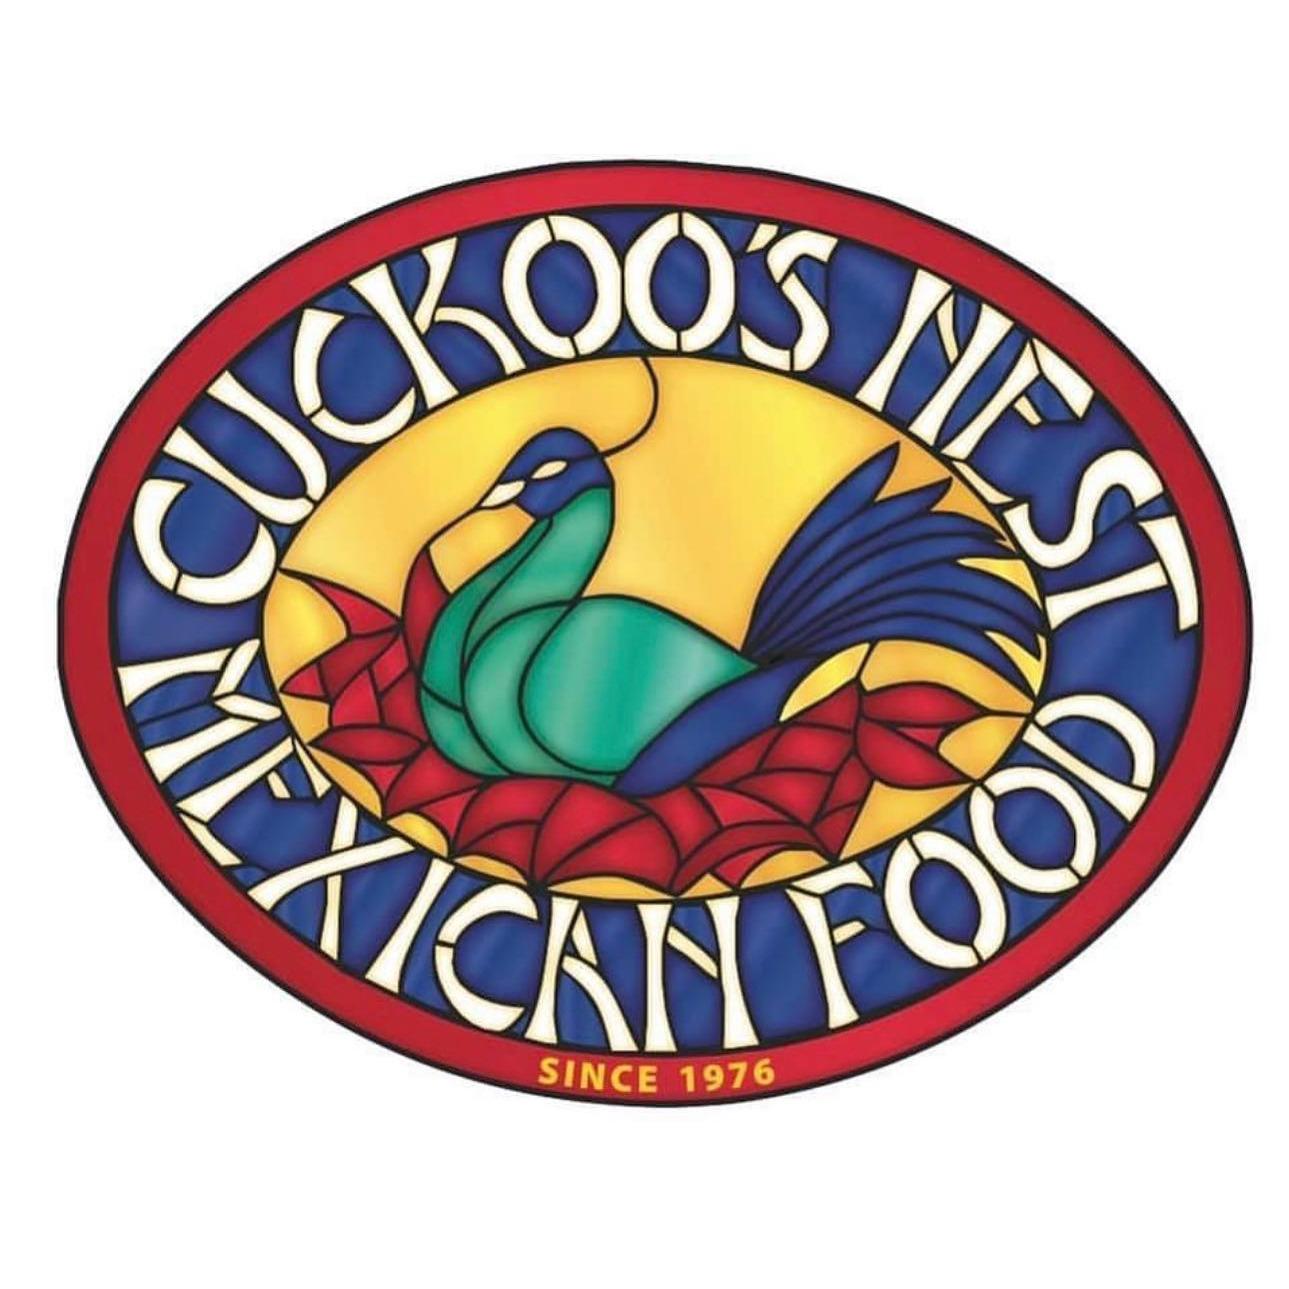 Cuckoos Nest - Old Saybrook, CT 06475 - (860)399-8189 | ShowMeLocal.com